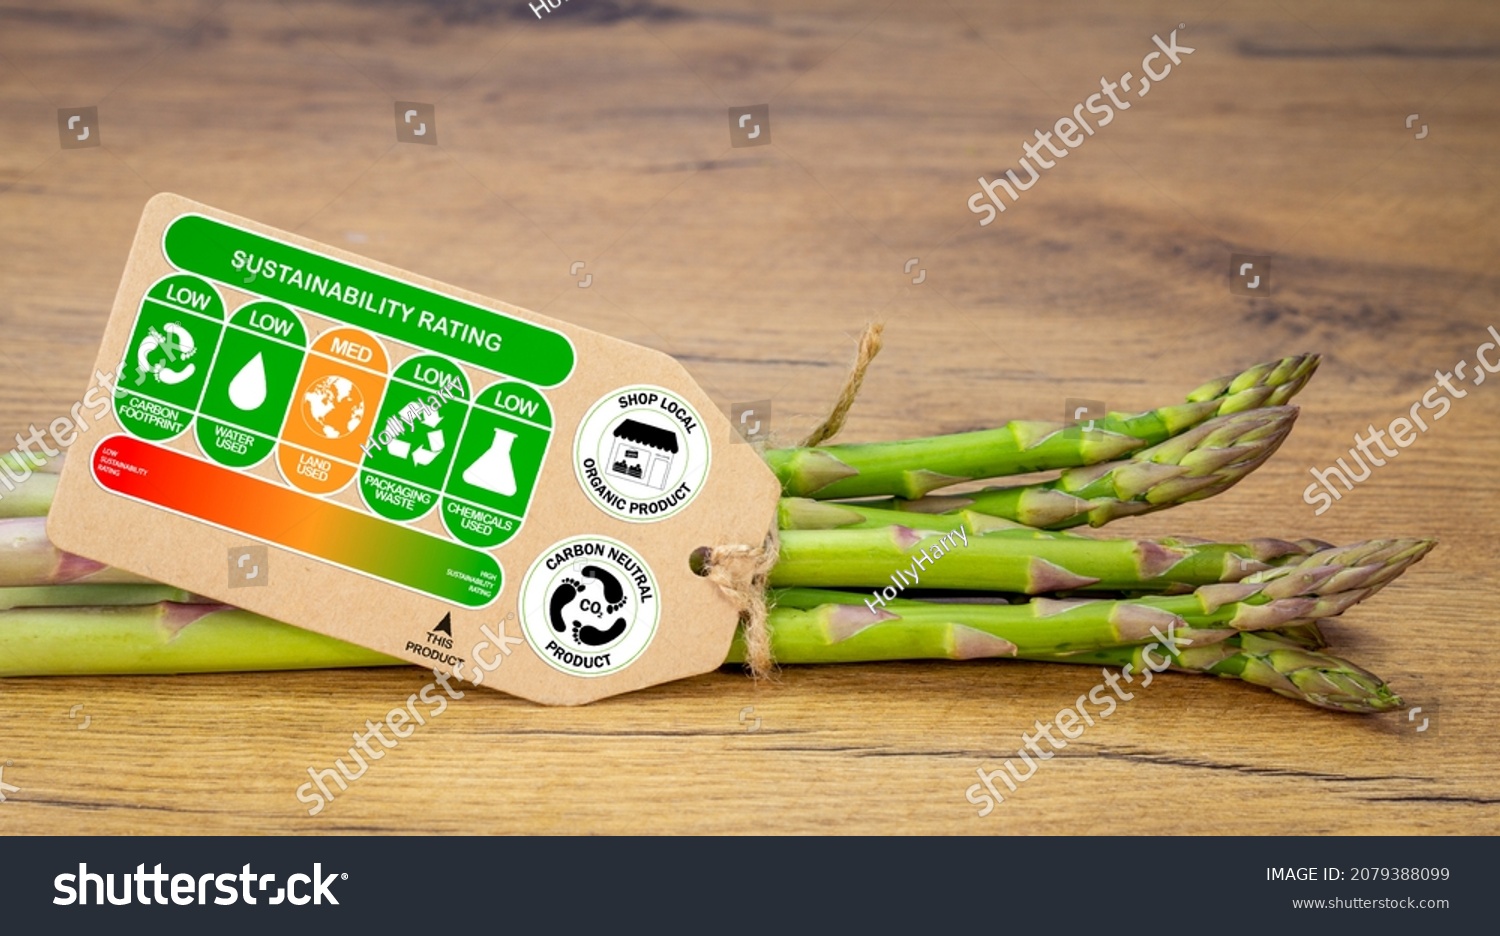 Sustainability rating label on organic asparagus with rating gradient for the product, carbon neutral and shop local labels, sustainable food concept #2079388099